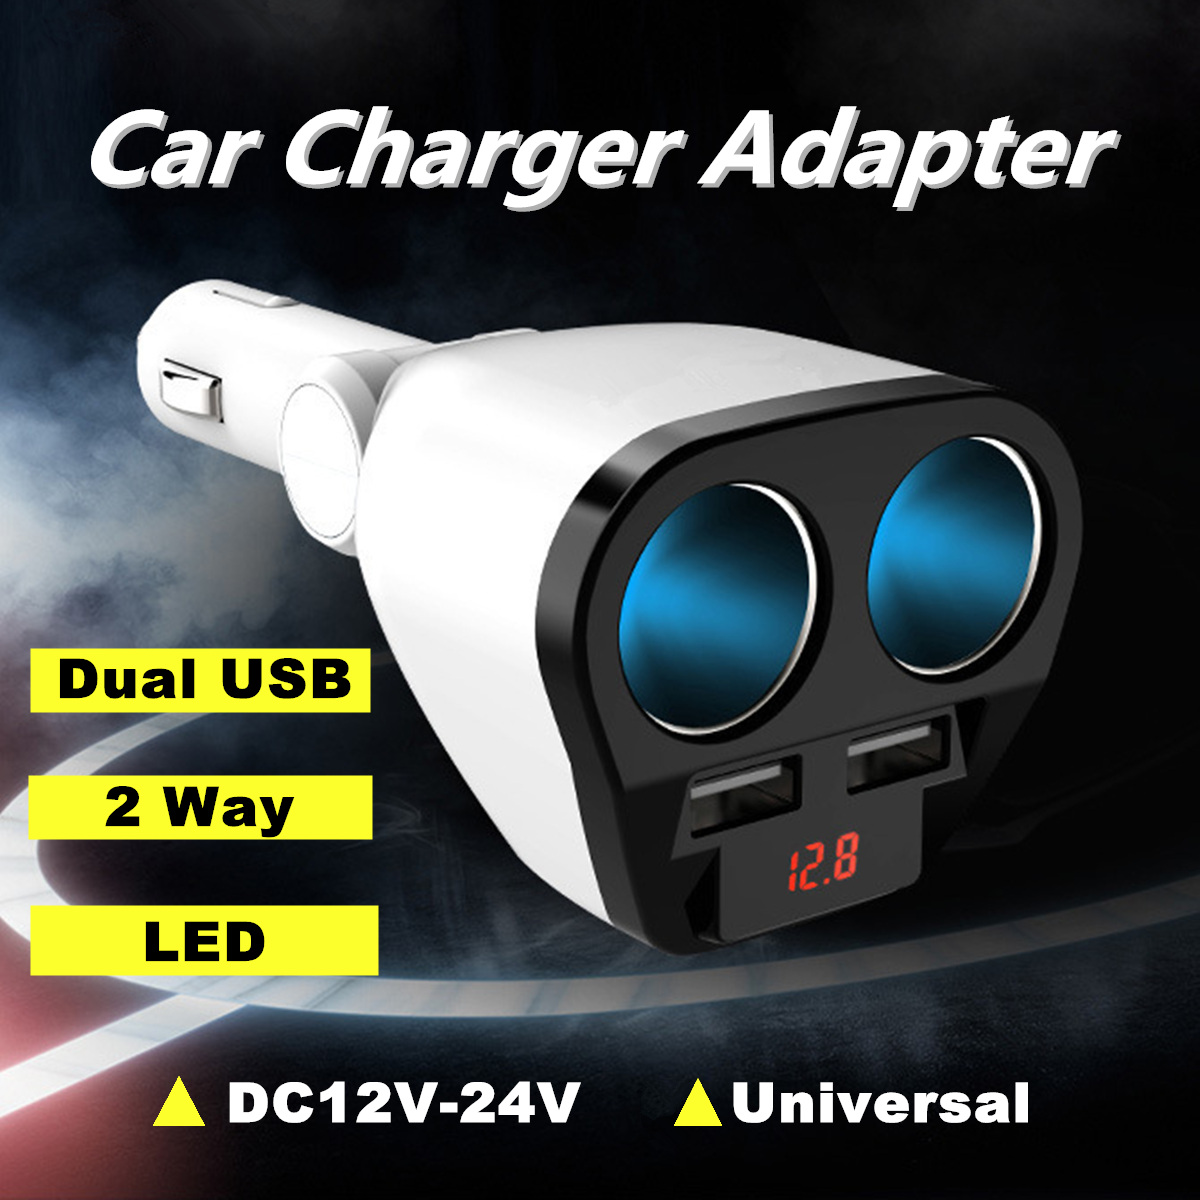 12V-24A-Cigarette-Lighter-Dual-USB-2-Way-Car-Socket-Power-Charger-Adapter-for-Cell-Phone-1184742